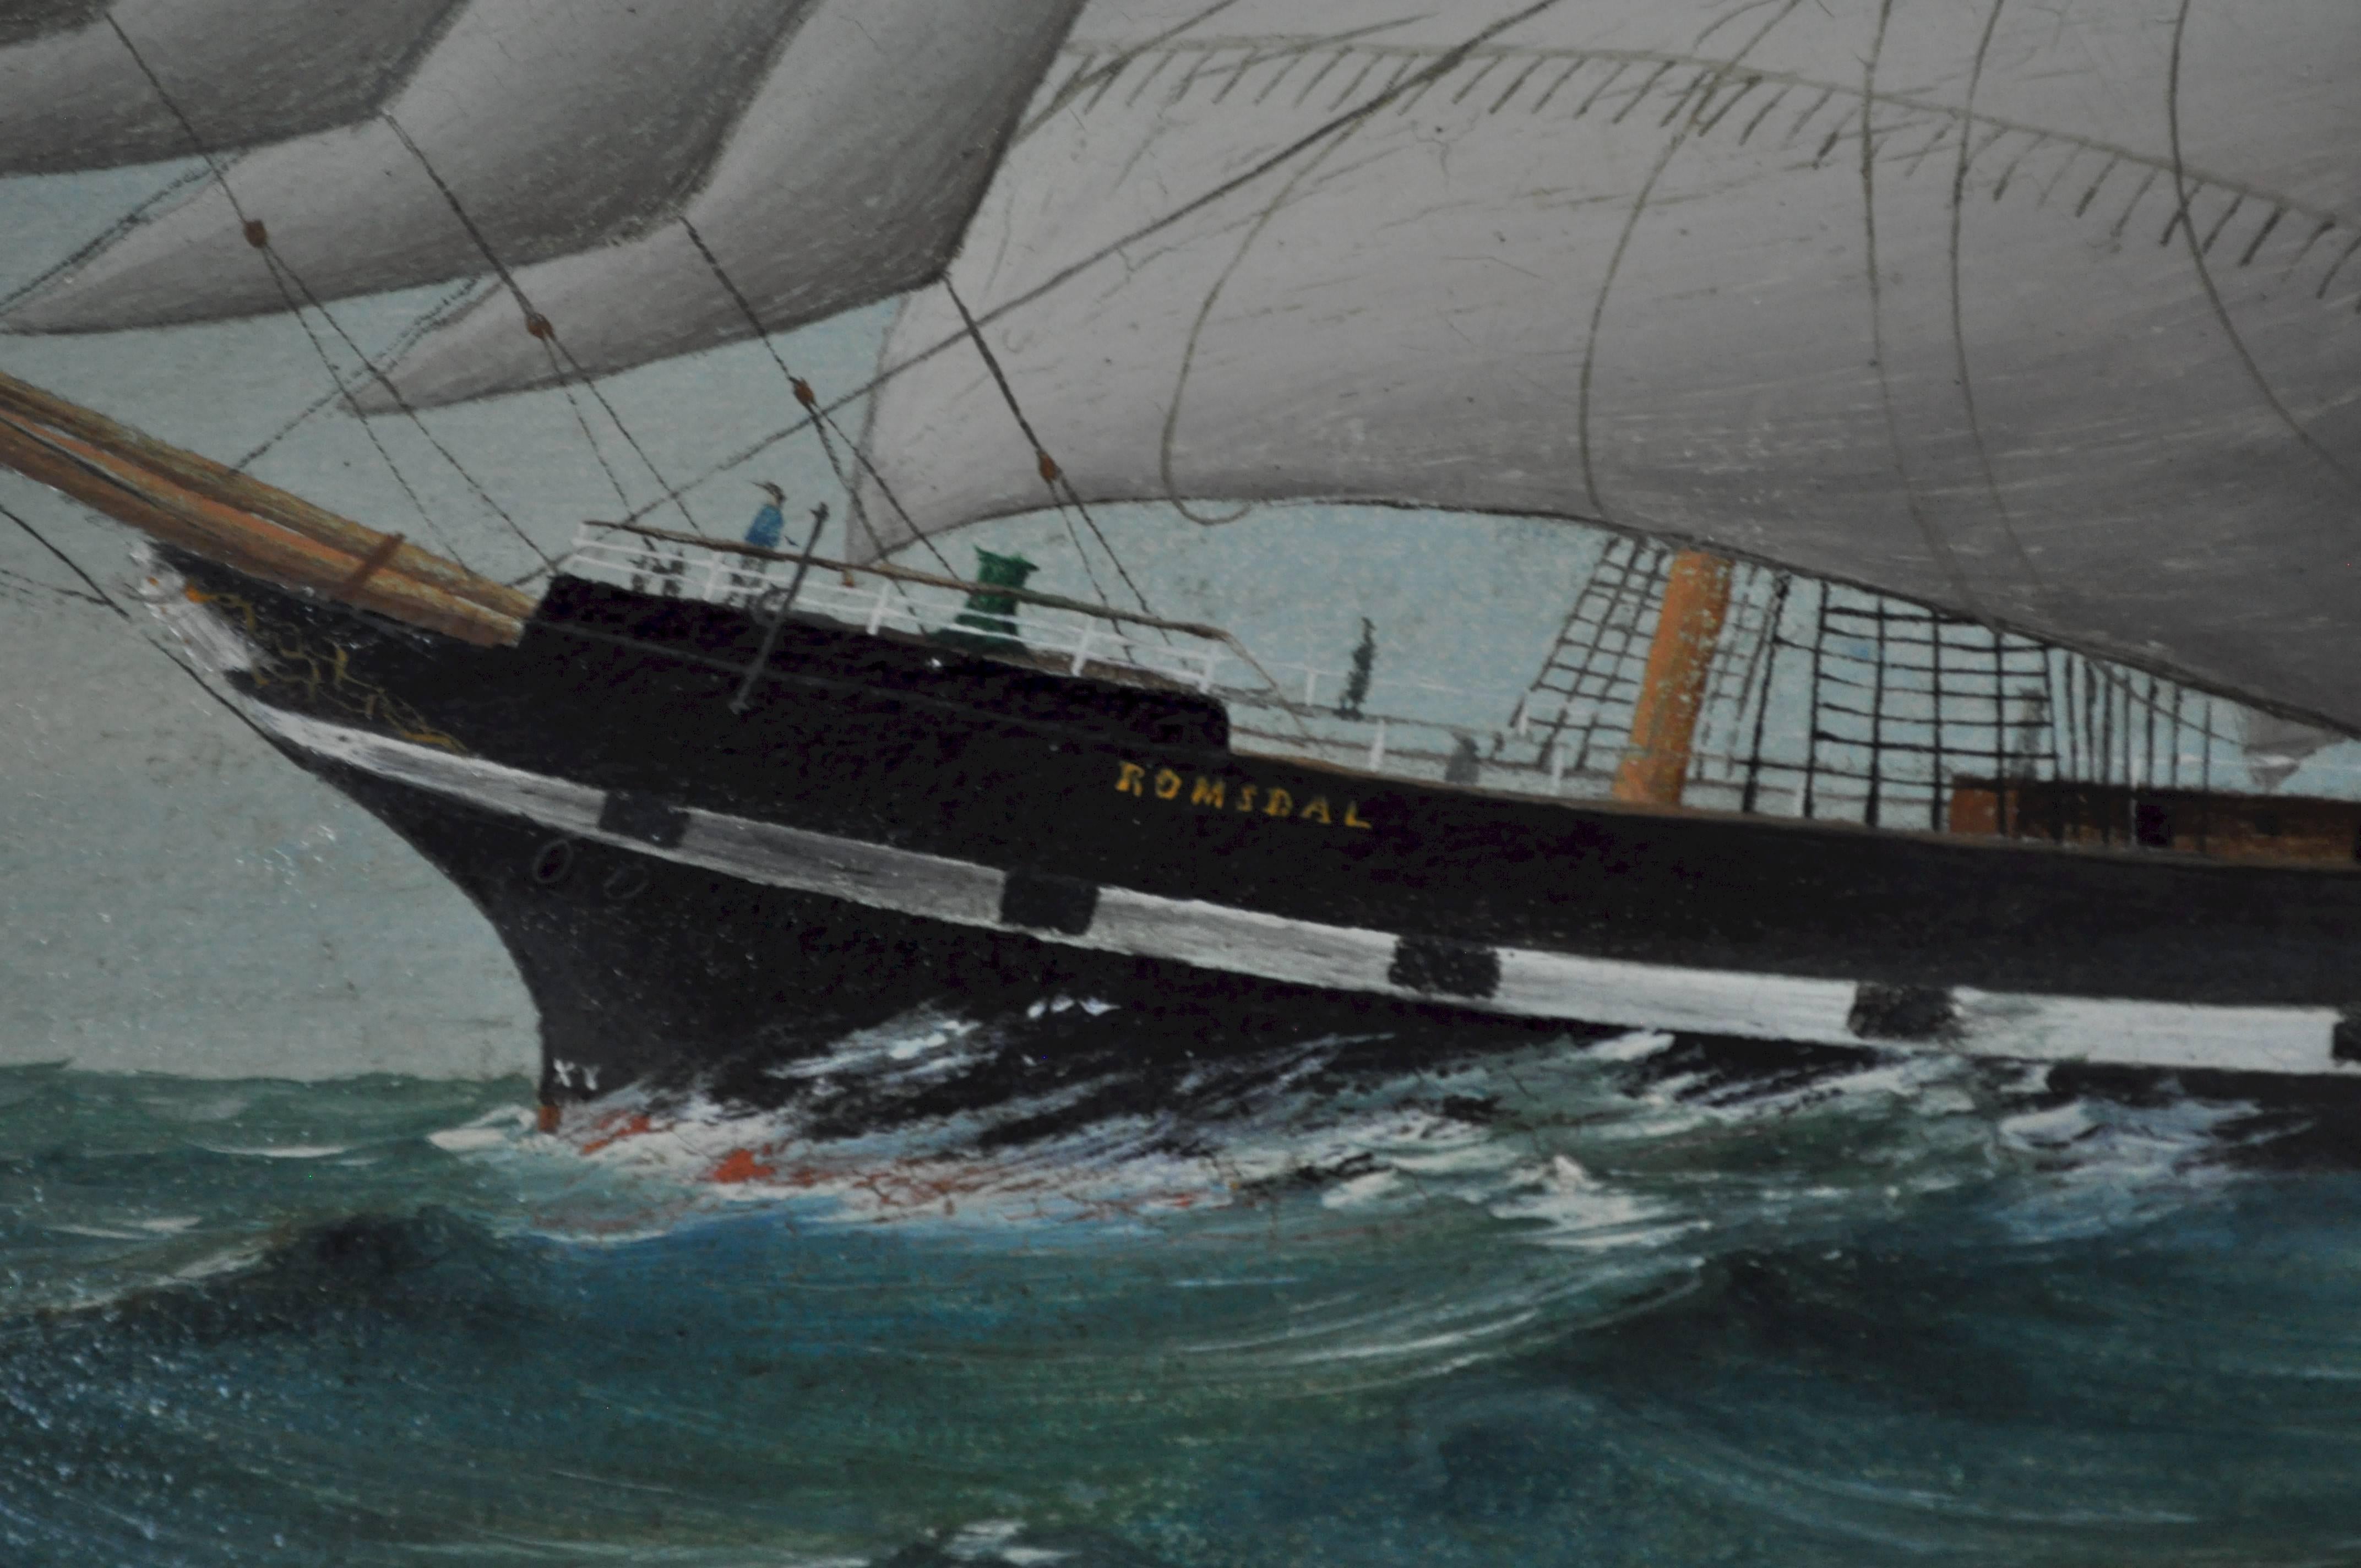 “Romsdal” a four masted barque - Realist Painting by Lai Fong